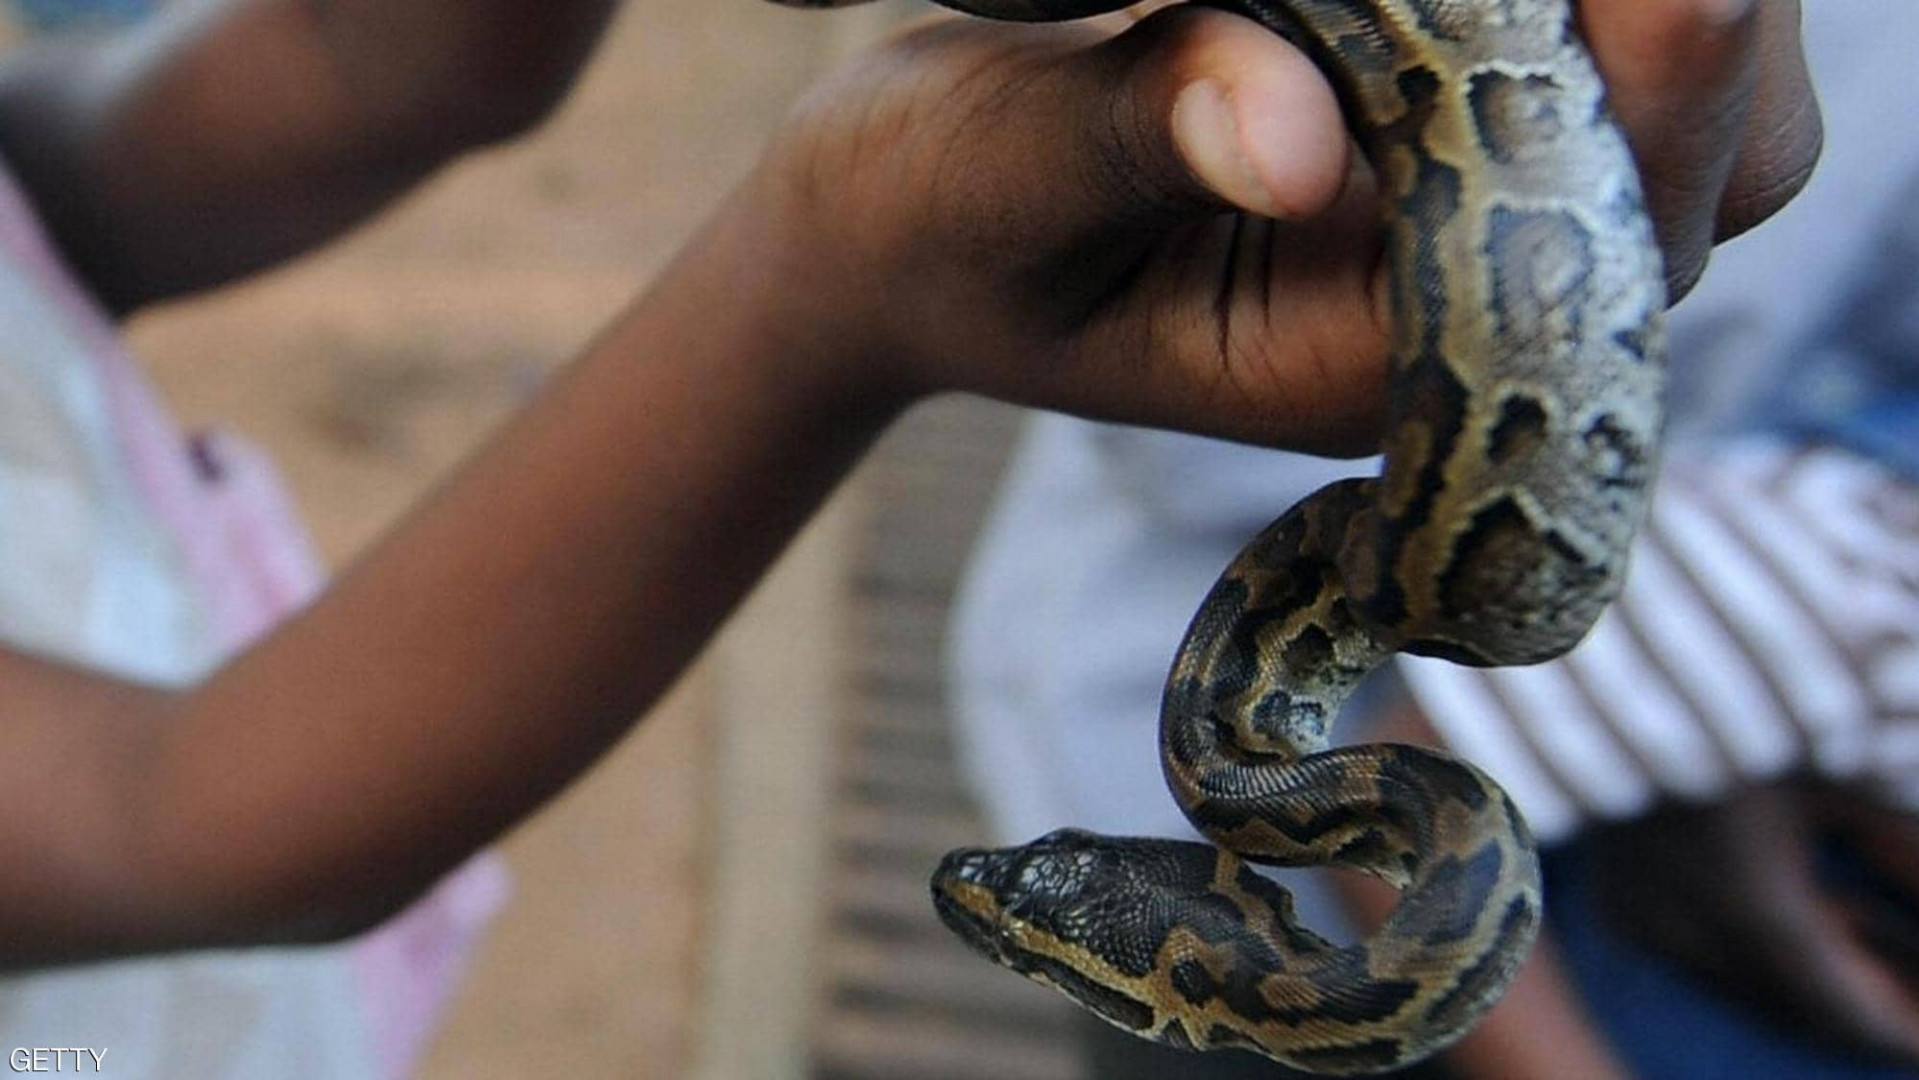 Women disappear claiming sleeping with a ritual snake